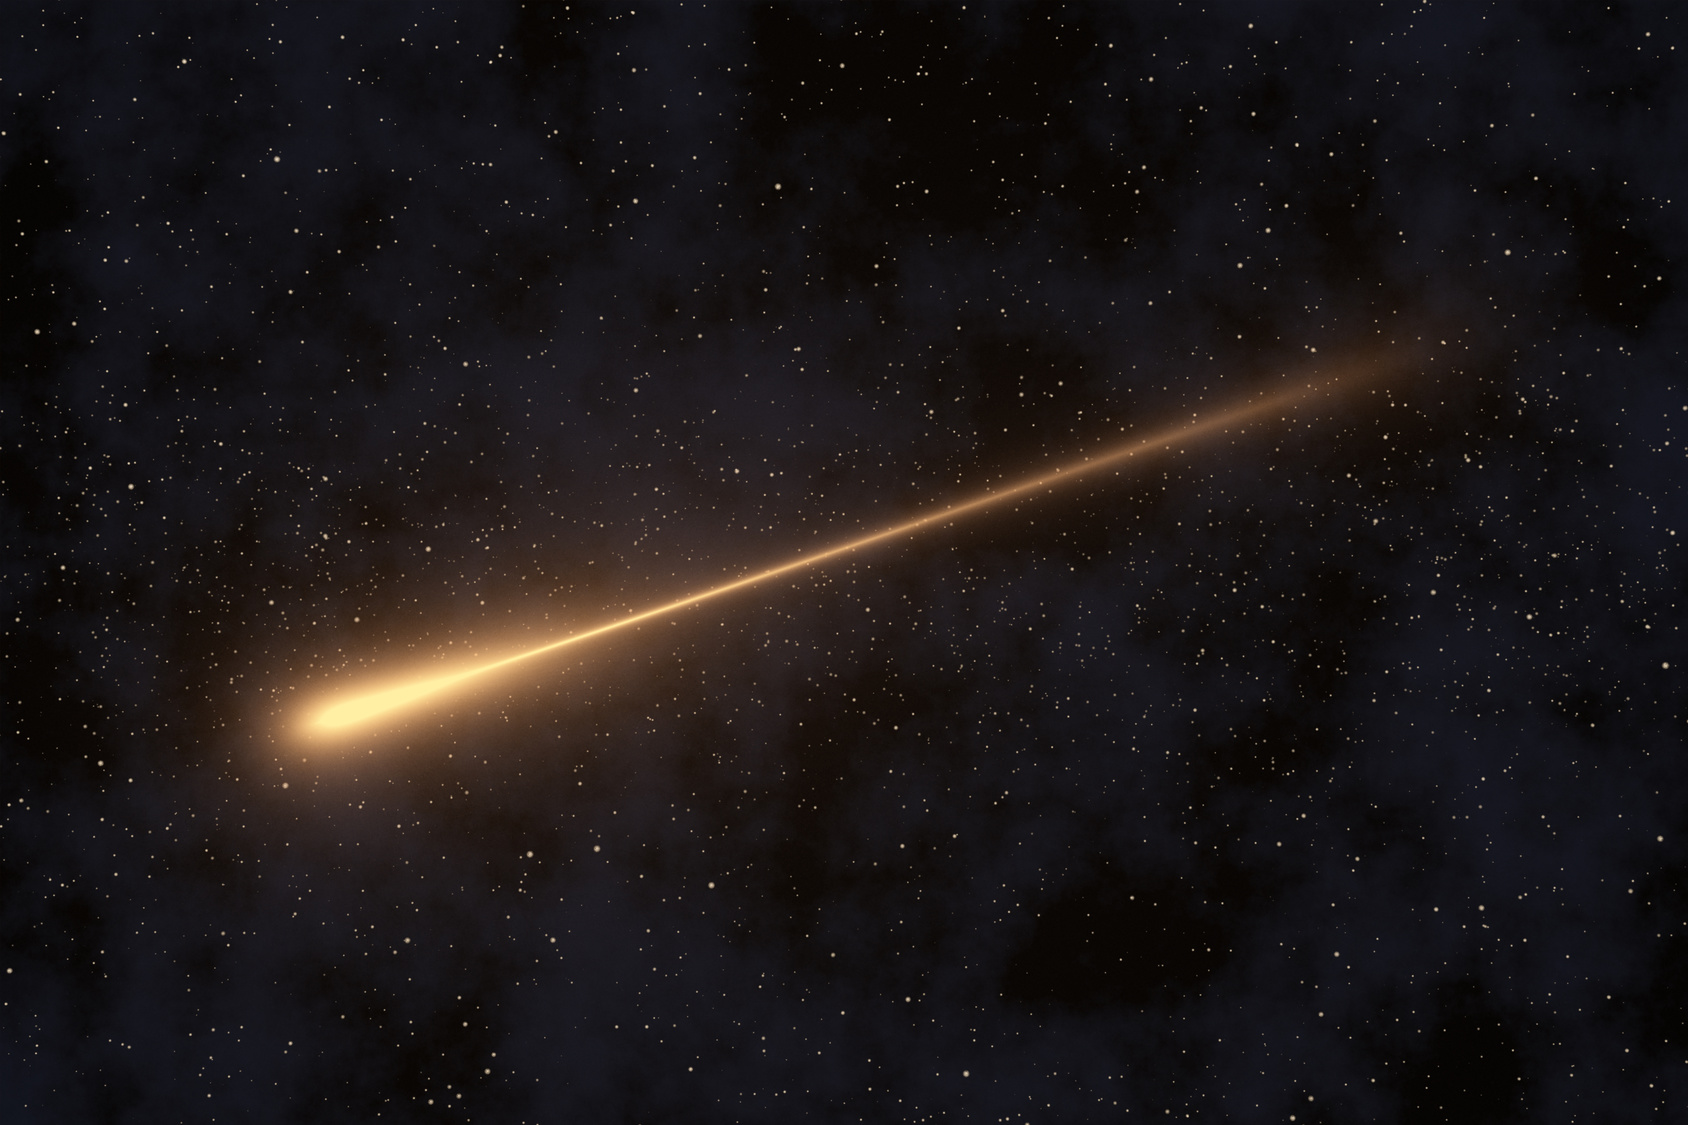 Fireball sighting was probably a meteorite